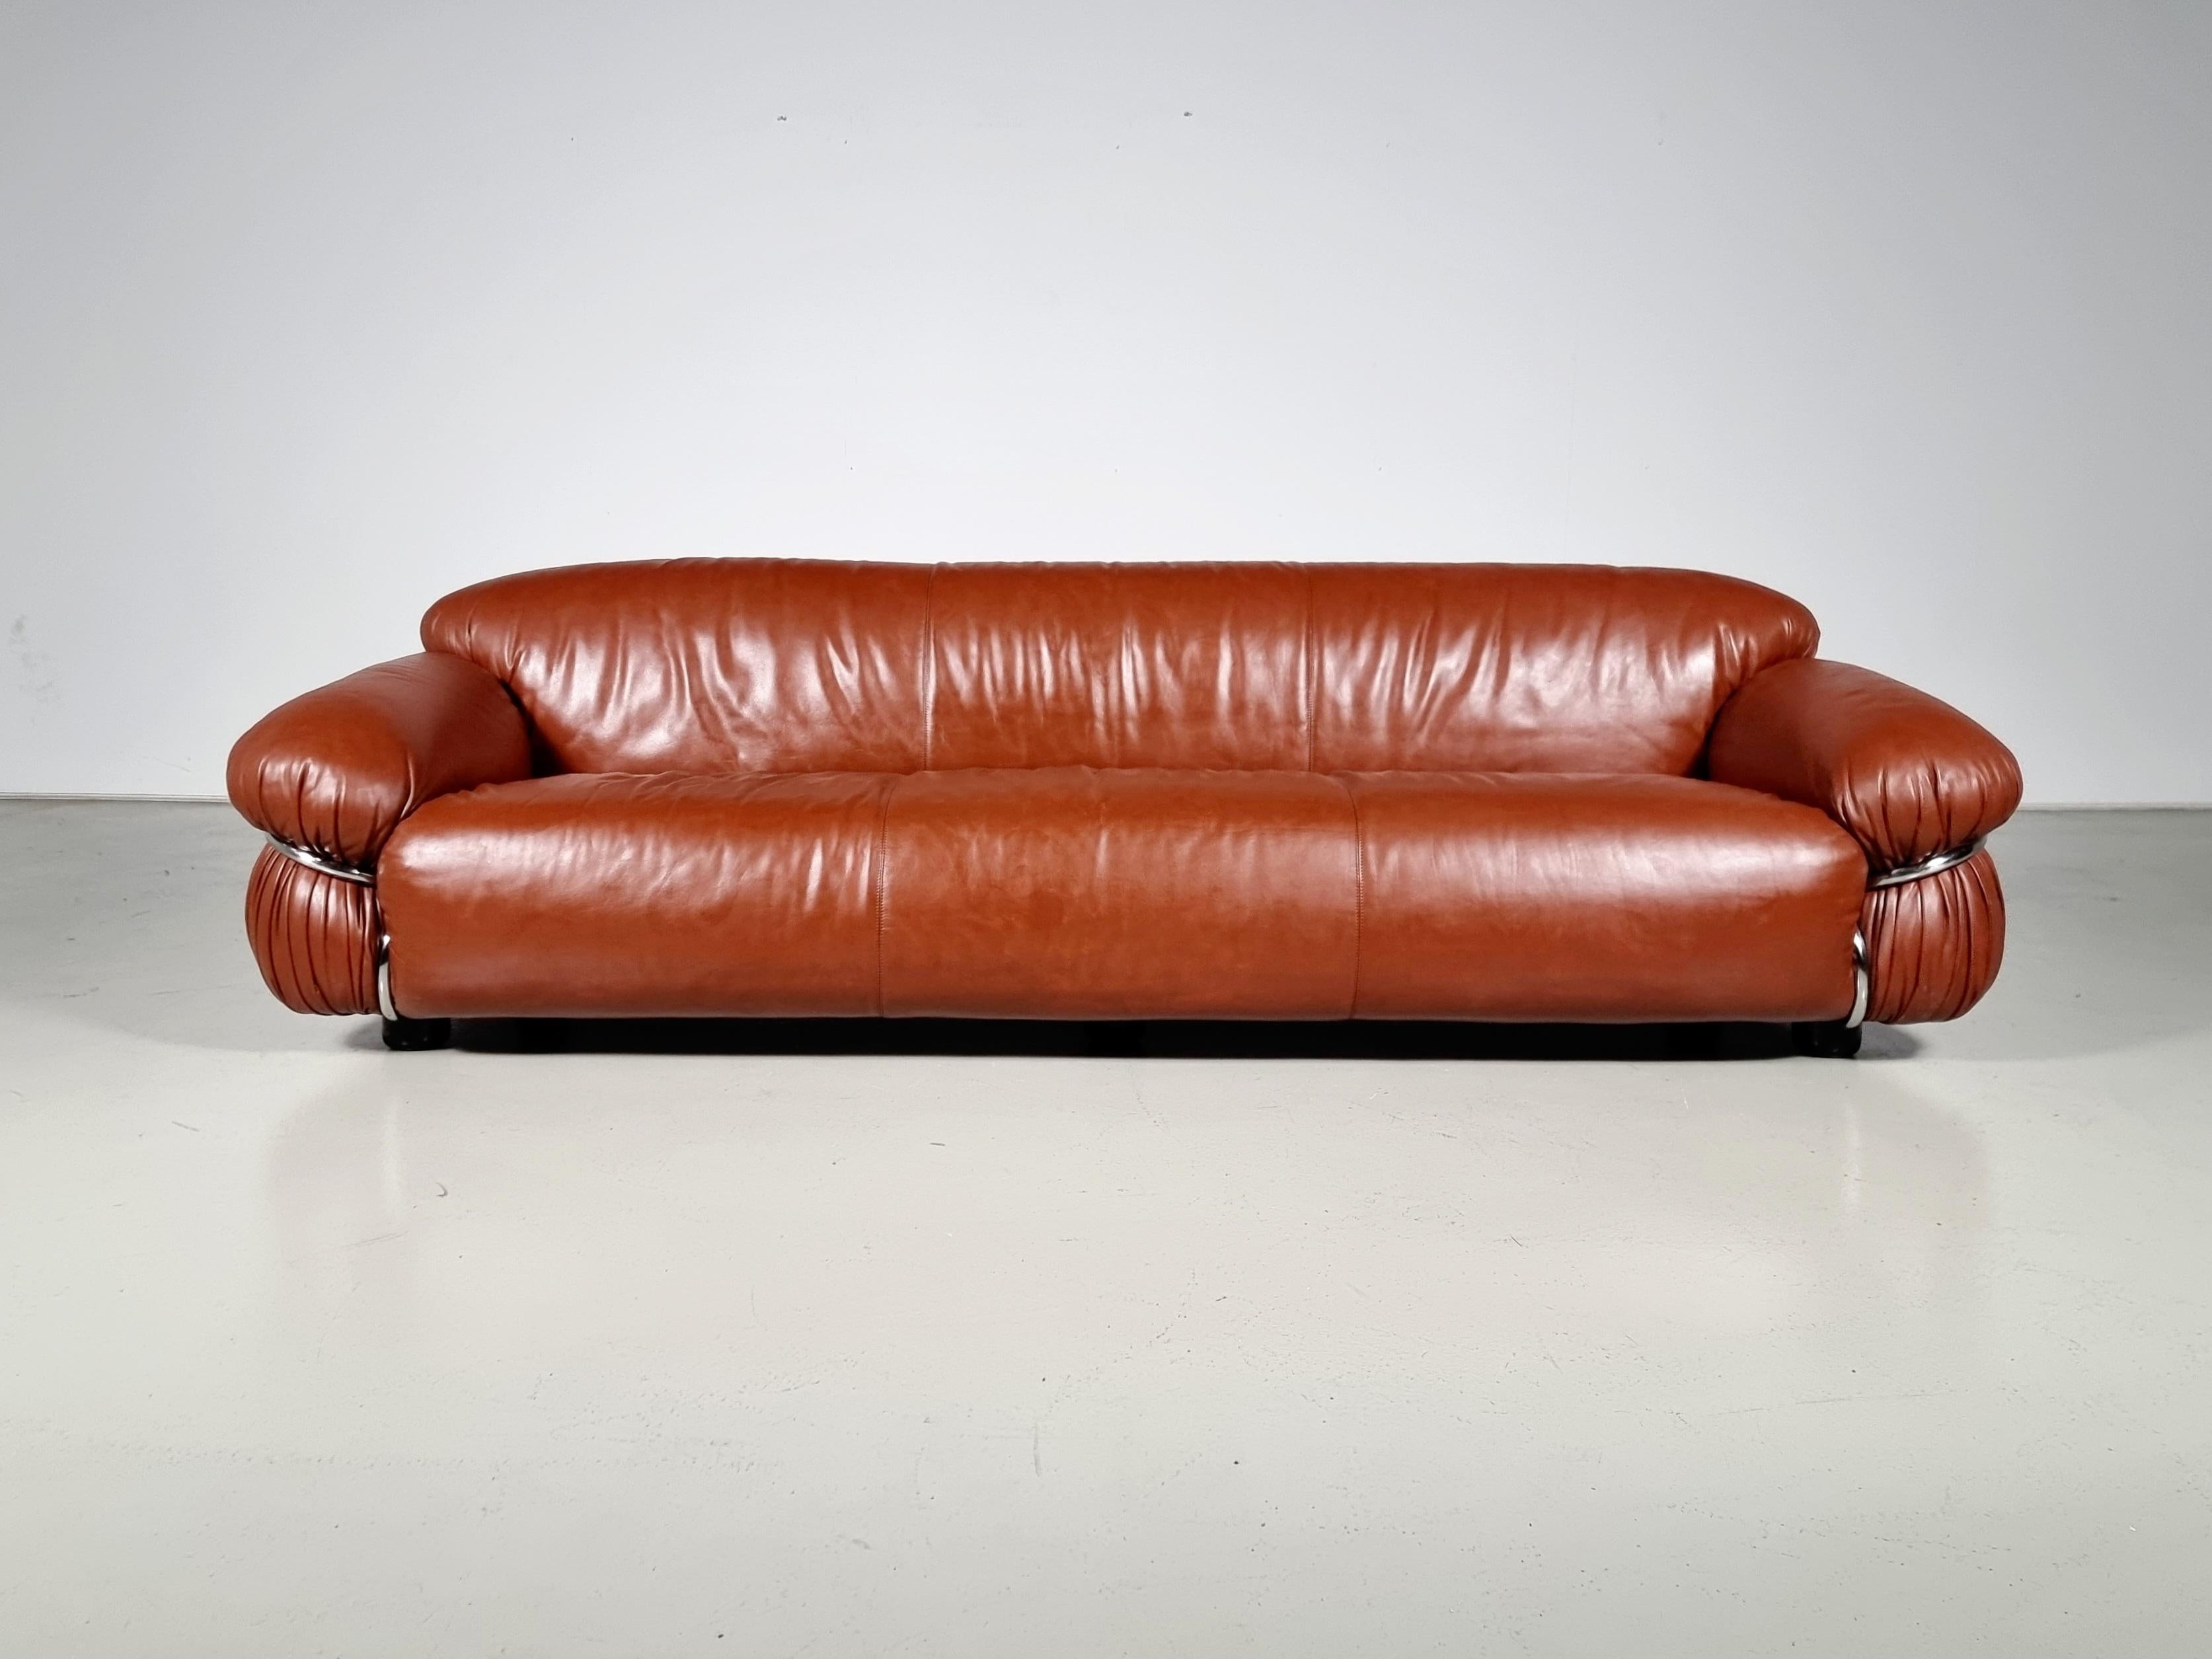 Early edition 3-seater sofa designed by Gianfranco Frattini for Cassina, Italy 1970. This sofa is upholstered in its original cognac leather upholstery with a chrome tubular metal frame. The sofa has very comfortable seating and the chrome is in